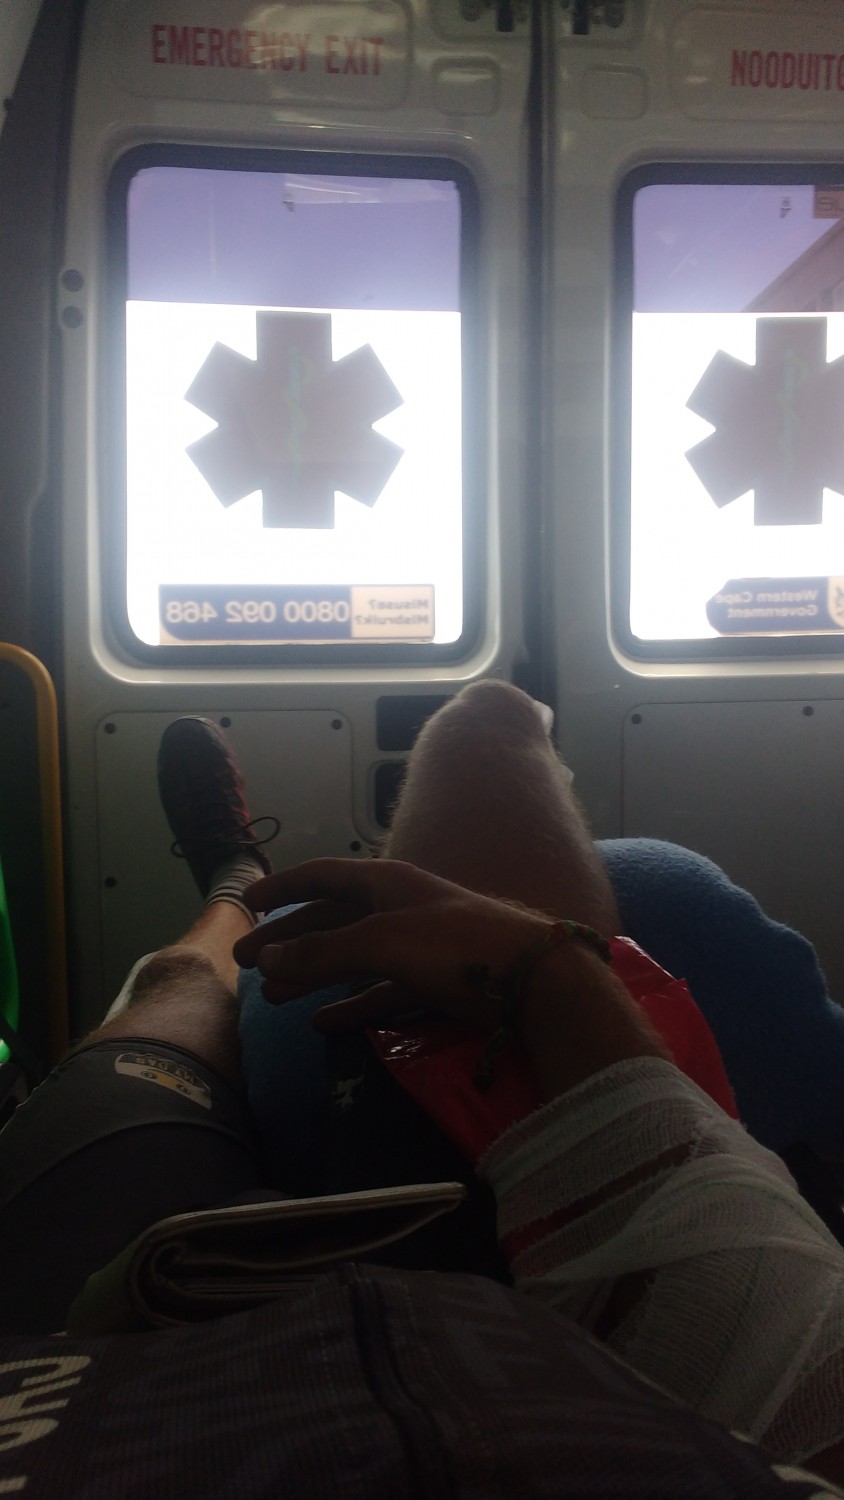 In the ambulance